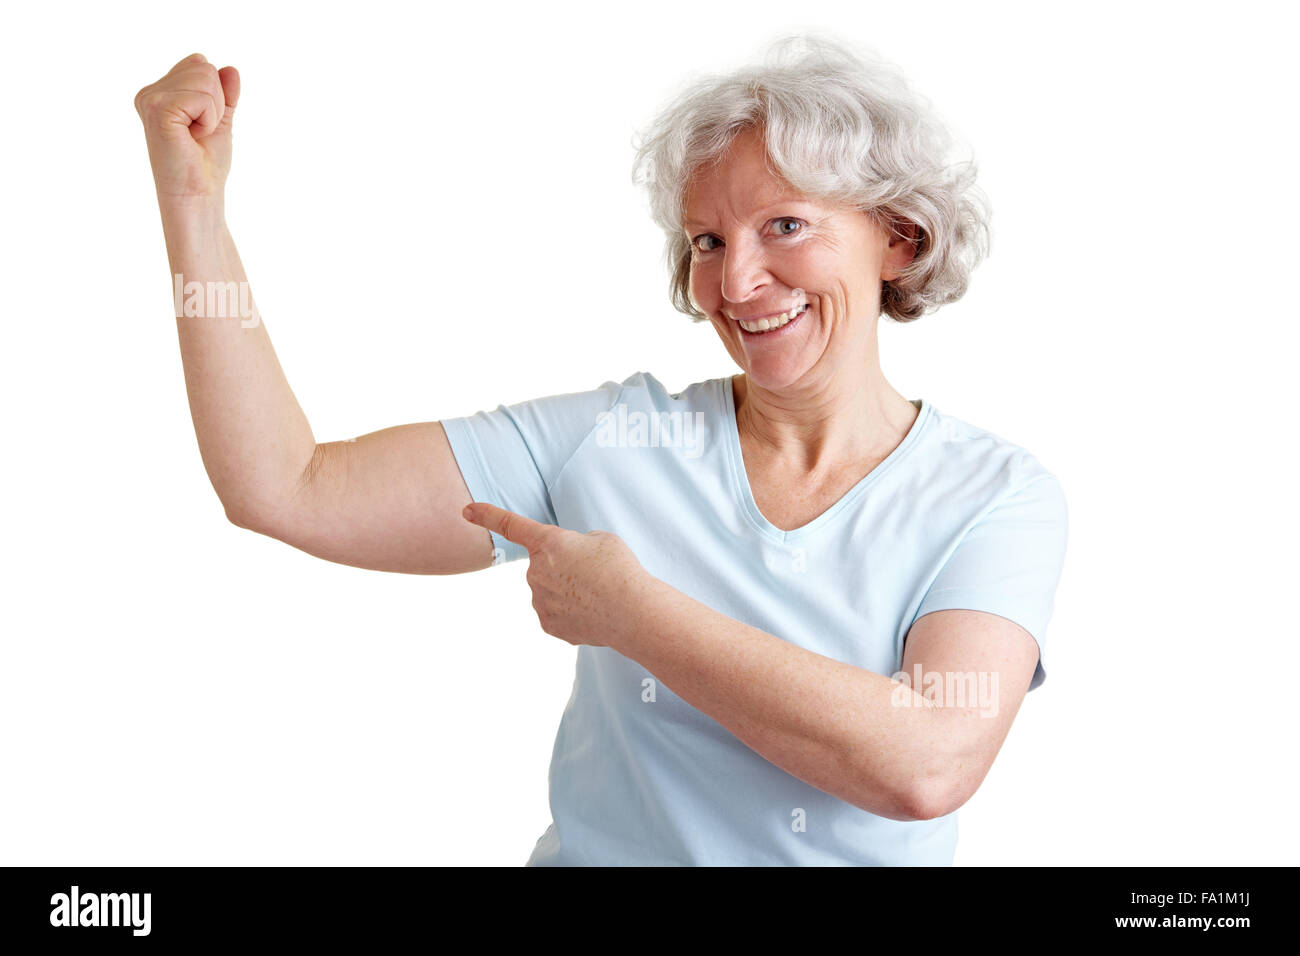 Elderly happy senior woman doing fitness exercises and showing her muscles Stock Photo